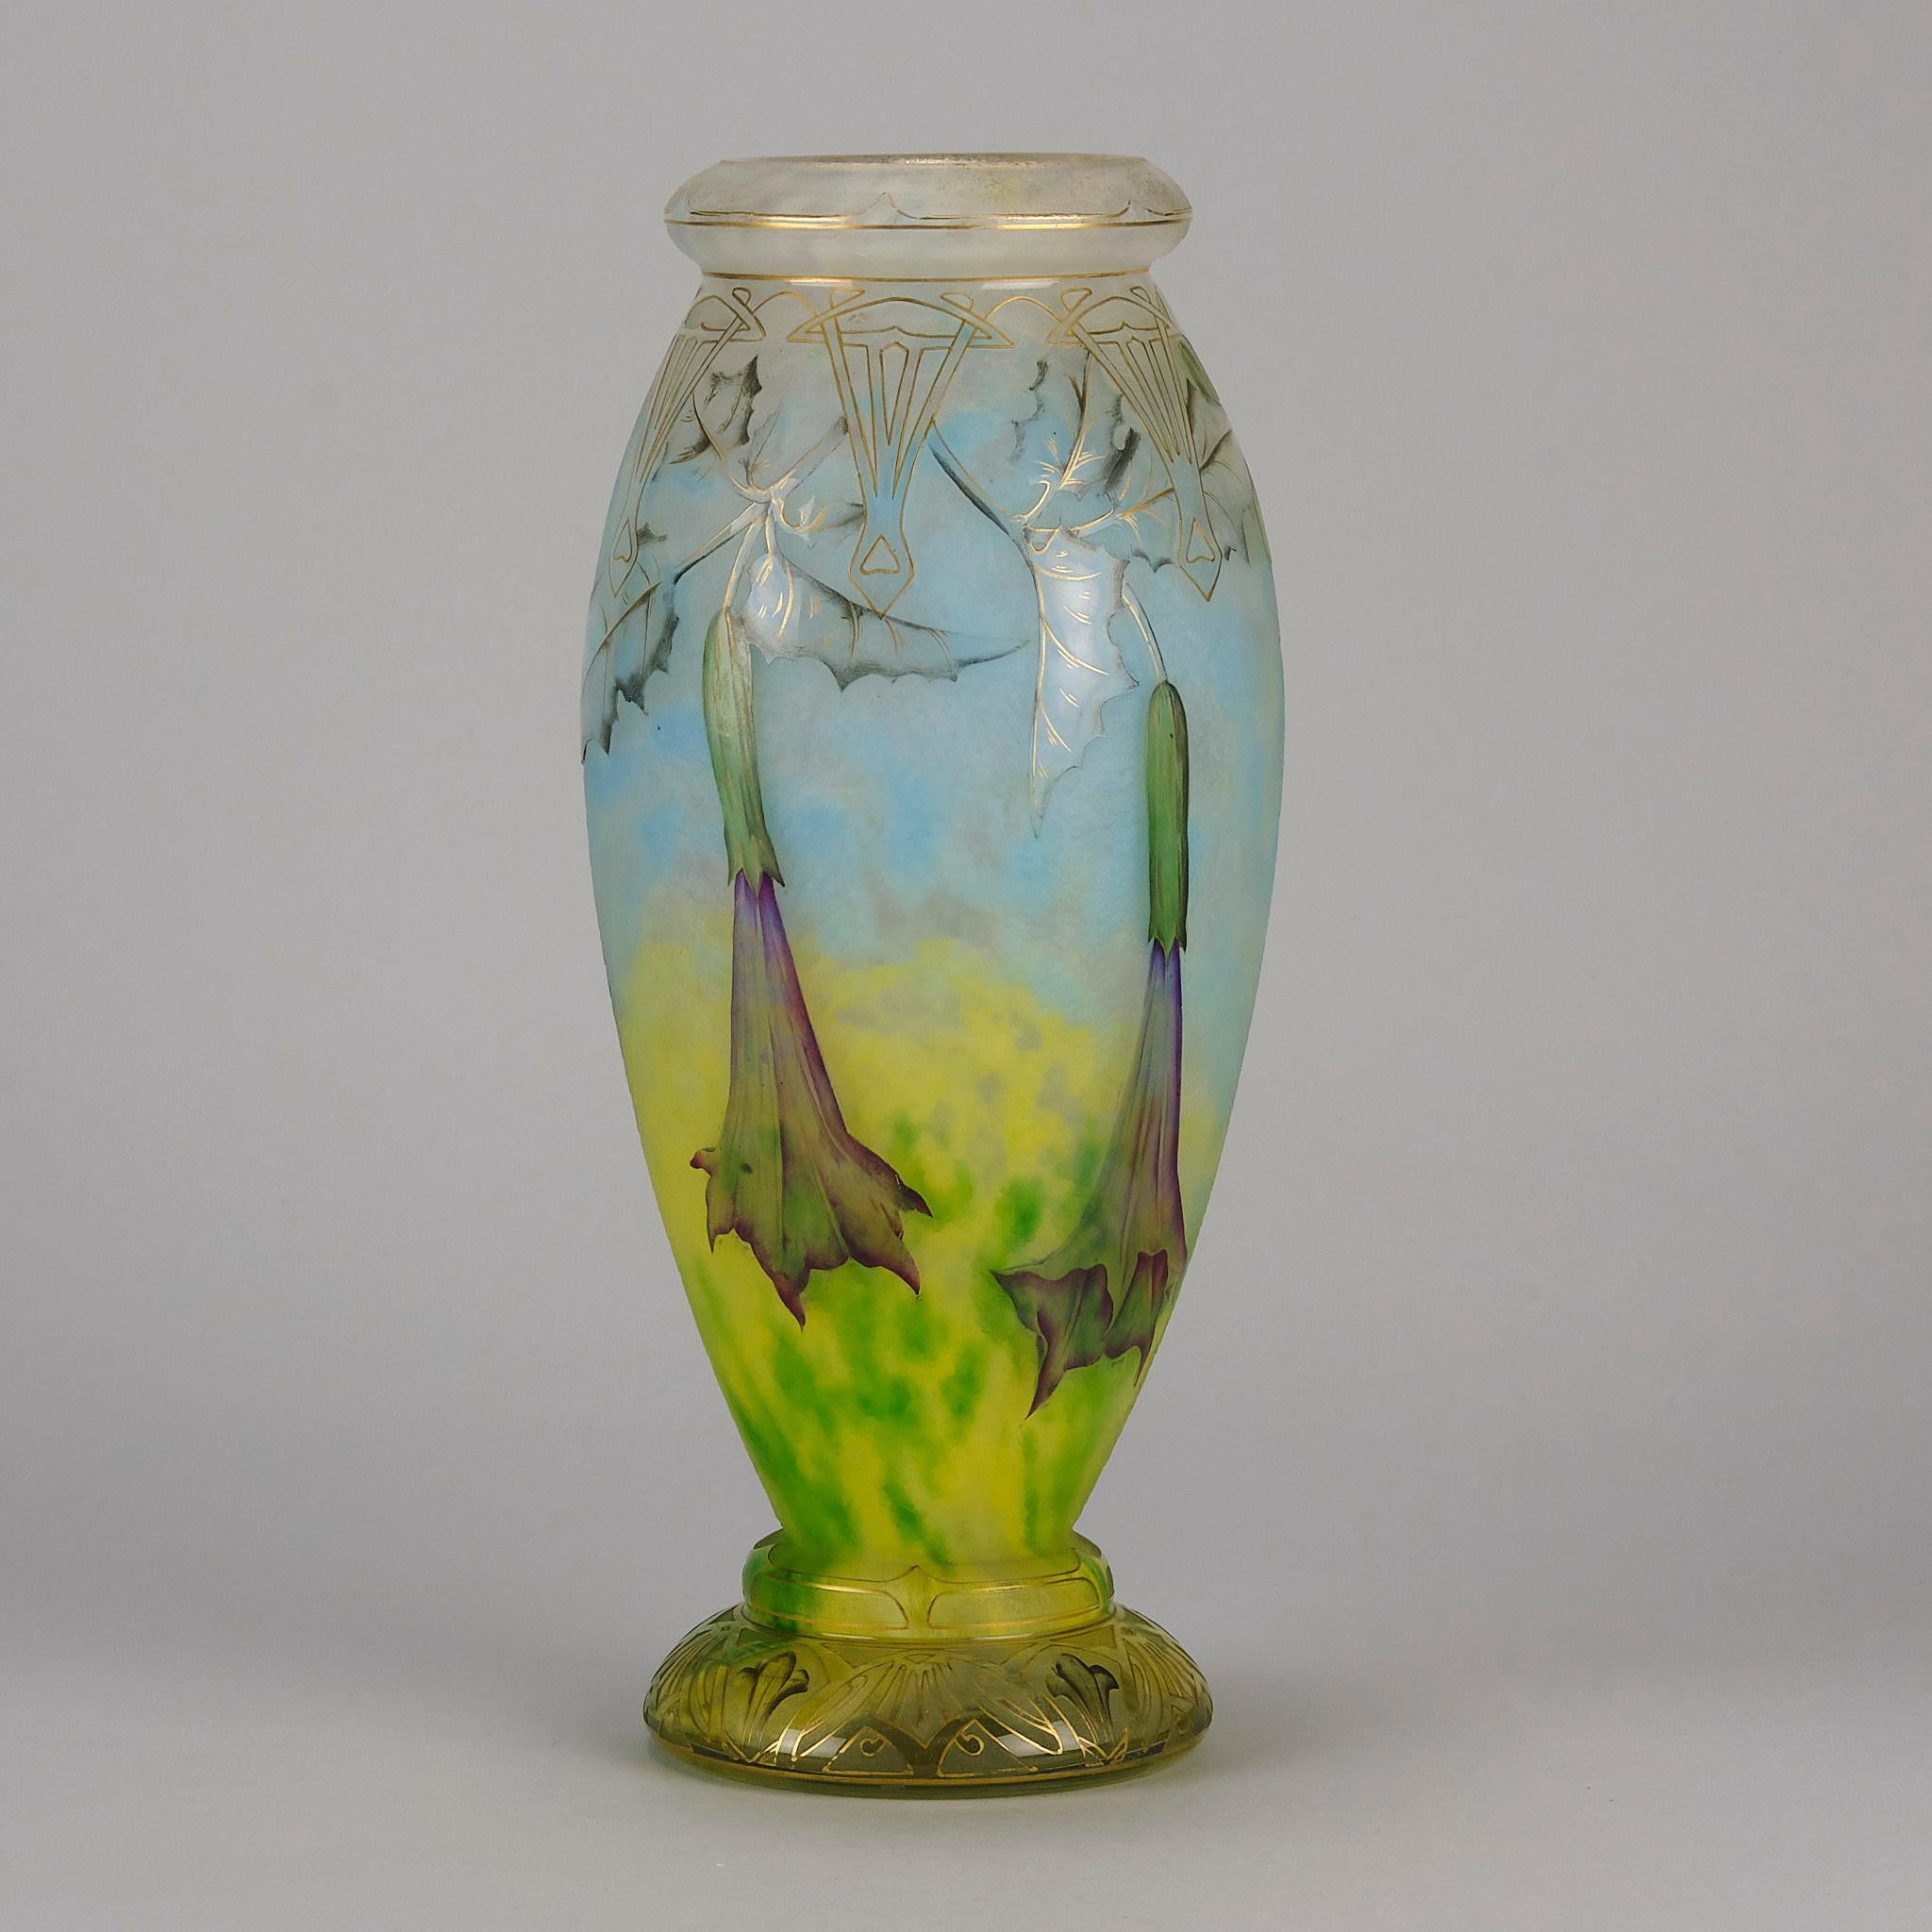 French Early 20th Century Art Nouveau Glass Vase entitled “Daturas Vase” by Daum Frères For Sale